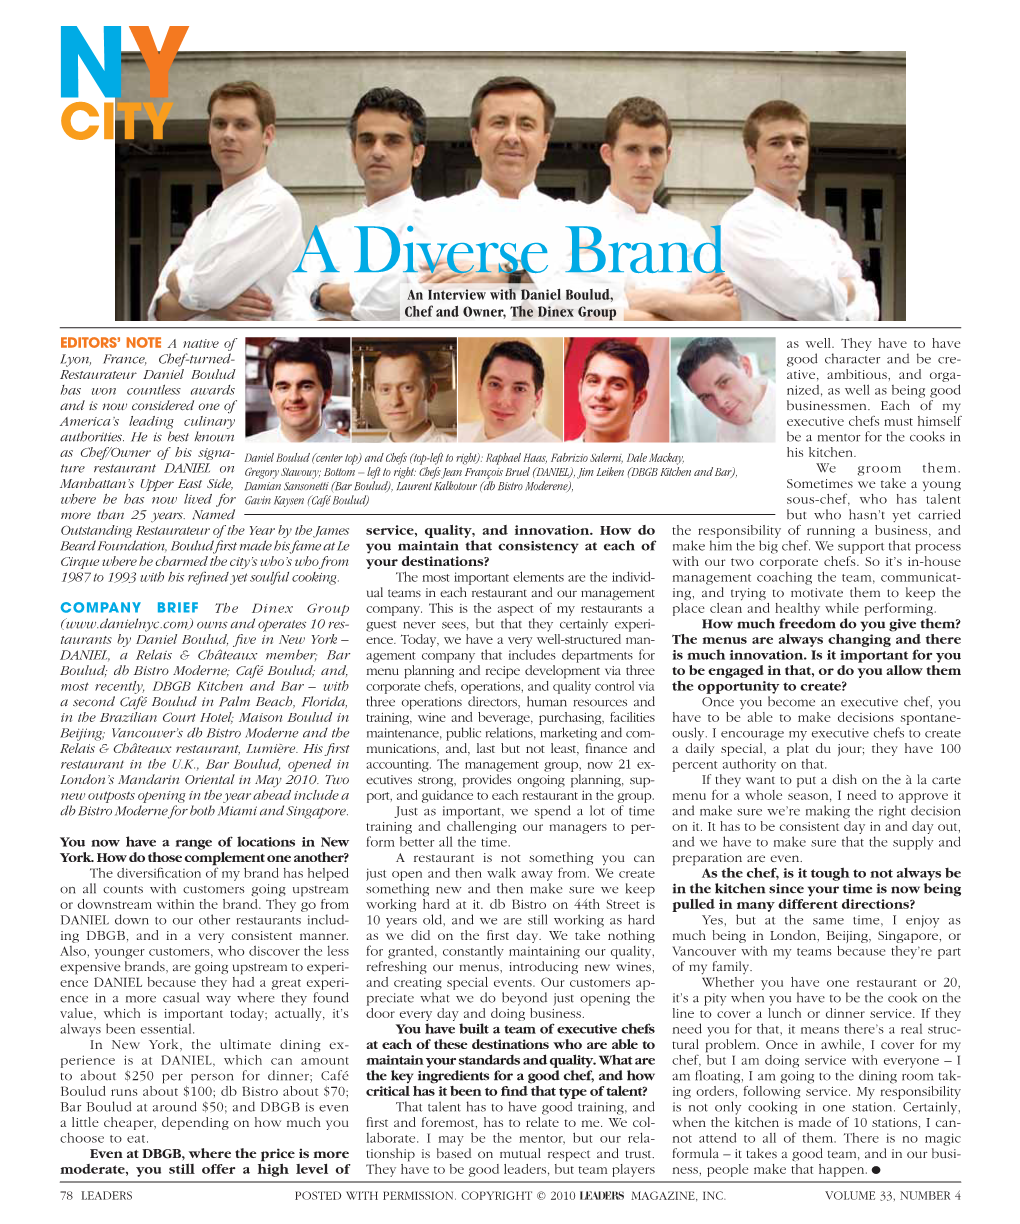 A Diverse Brand an Interview with Daniel Boulud, Chef and Owner, the Dinex Group